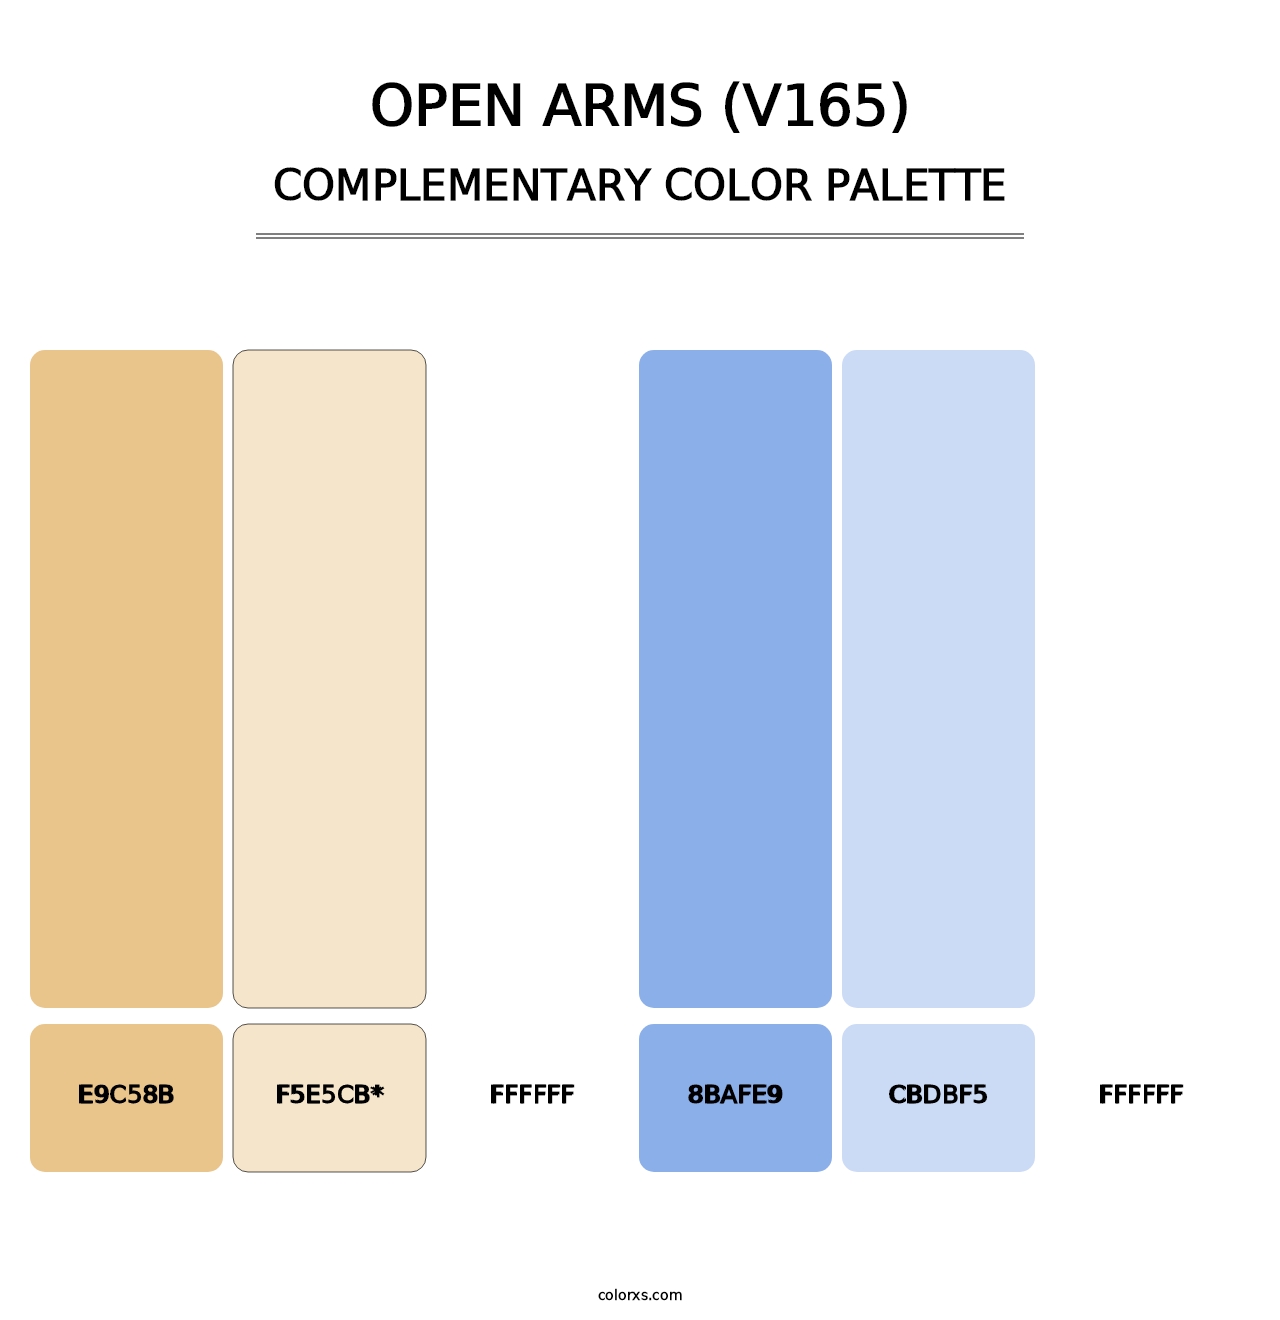 Open Arms (V165) - Complementary Color Palette